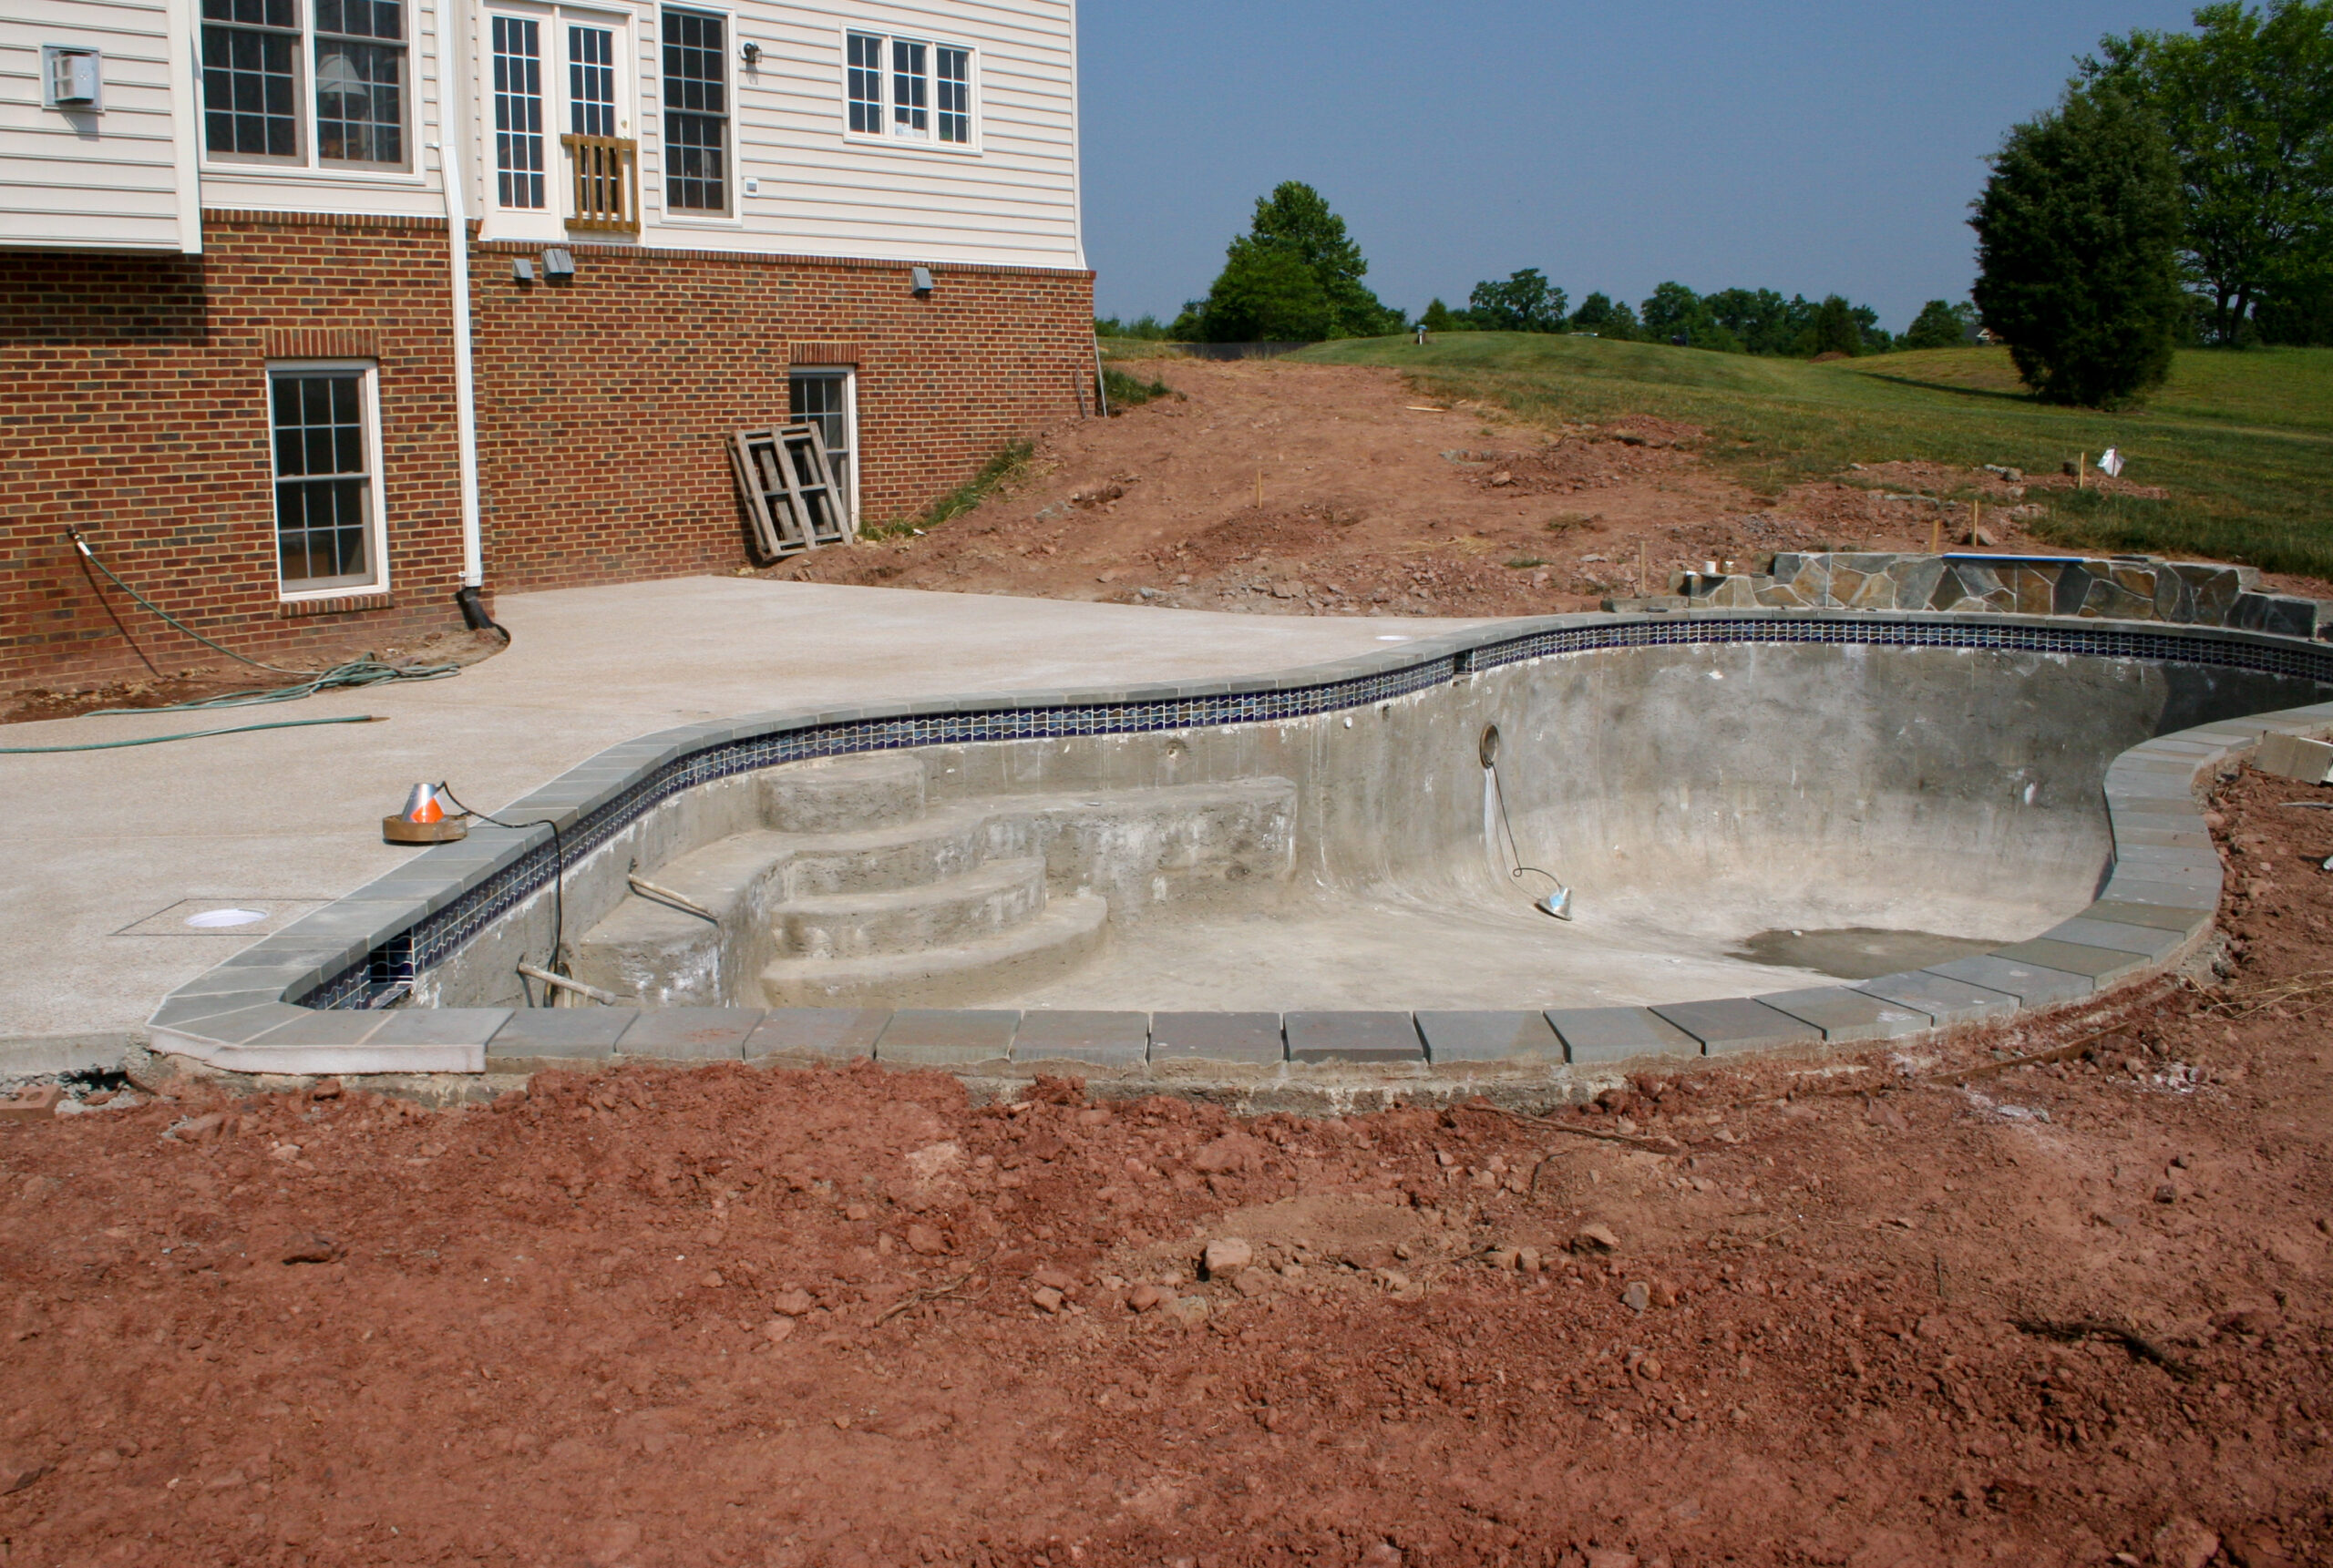 An unfinished pool interior in the process of being designed and constructed.